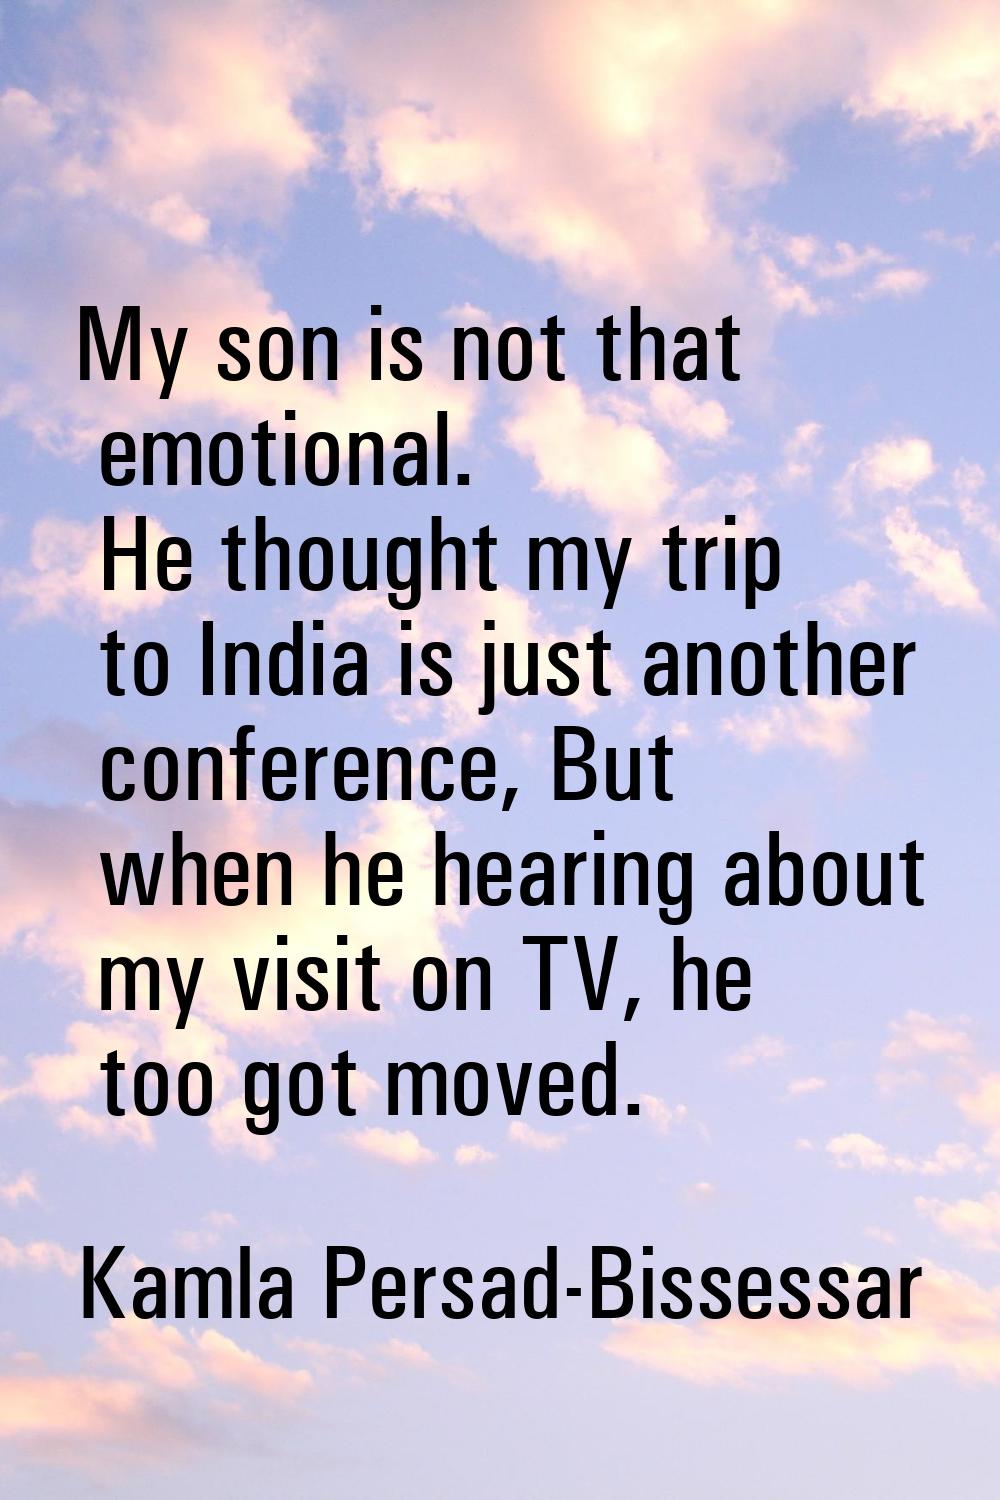 My son is not that emotional. He thought my trip to India is just another conference, But when he h